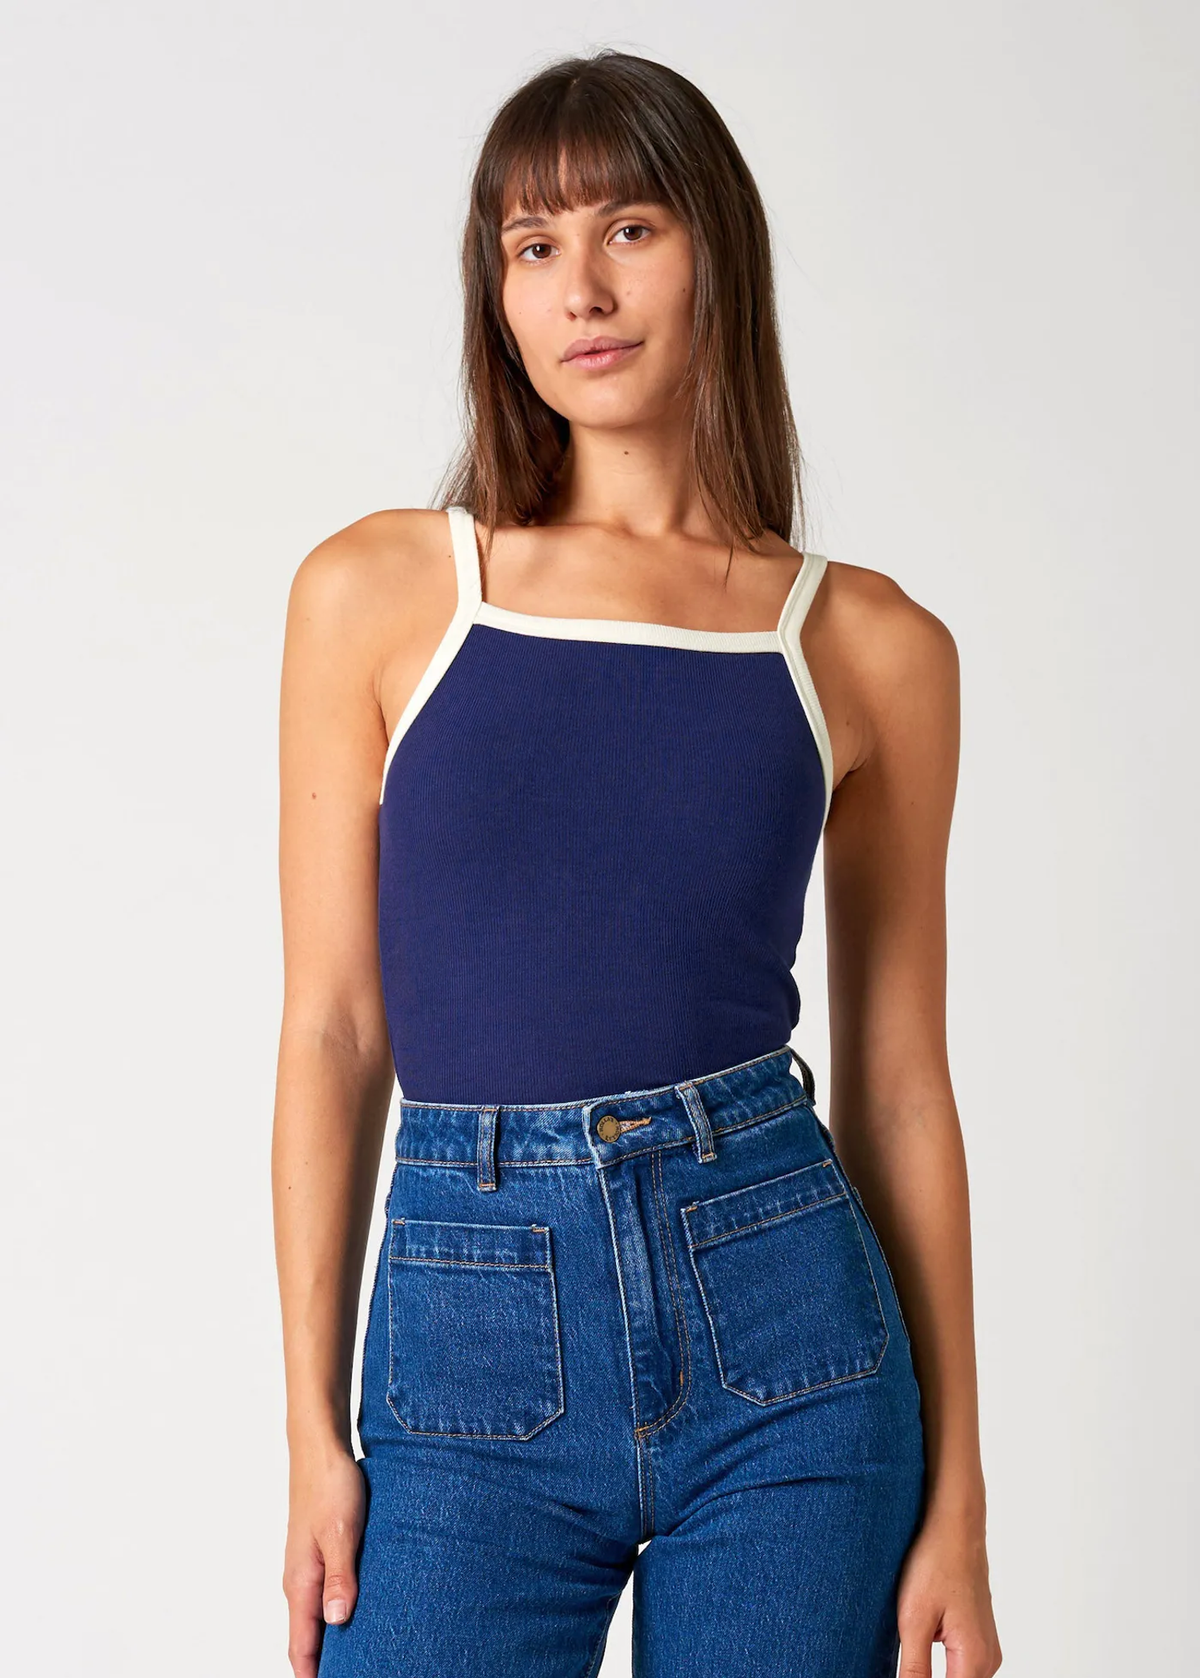 Rolla's Jeans Naomi Tank in Marine Blue and White. Retro Summer Camp style tank with strappy straps and a ribbed blue body.